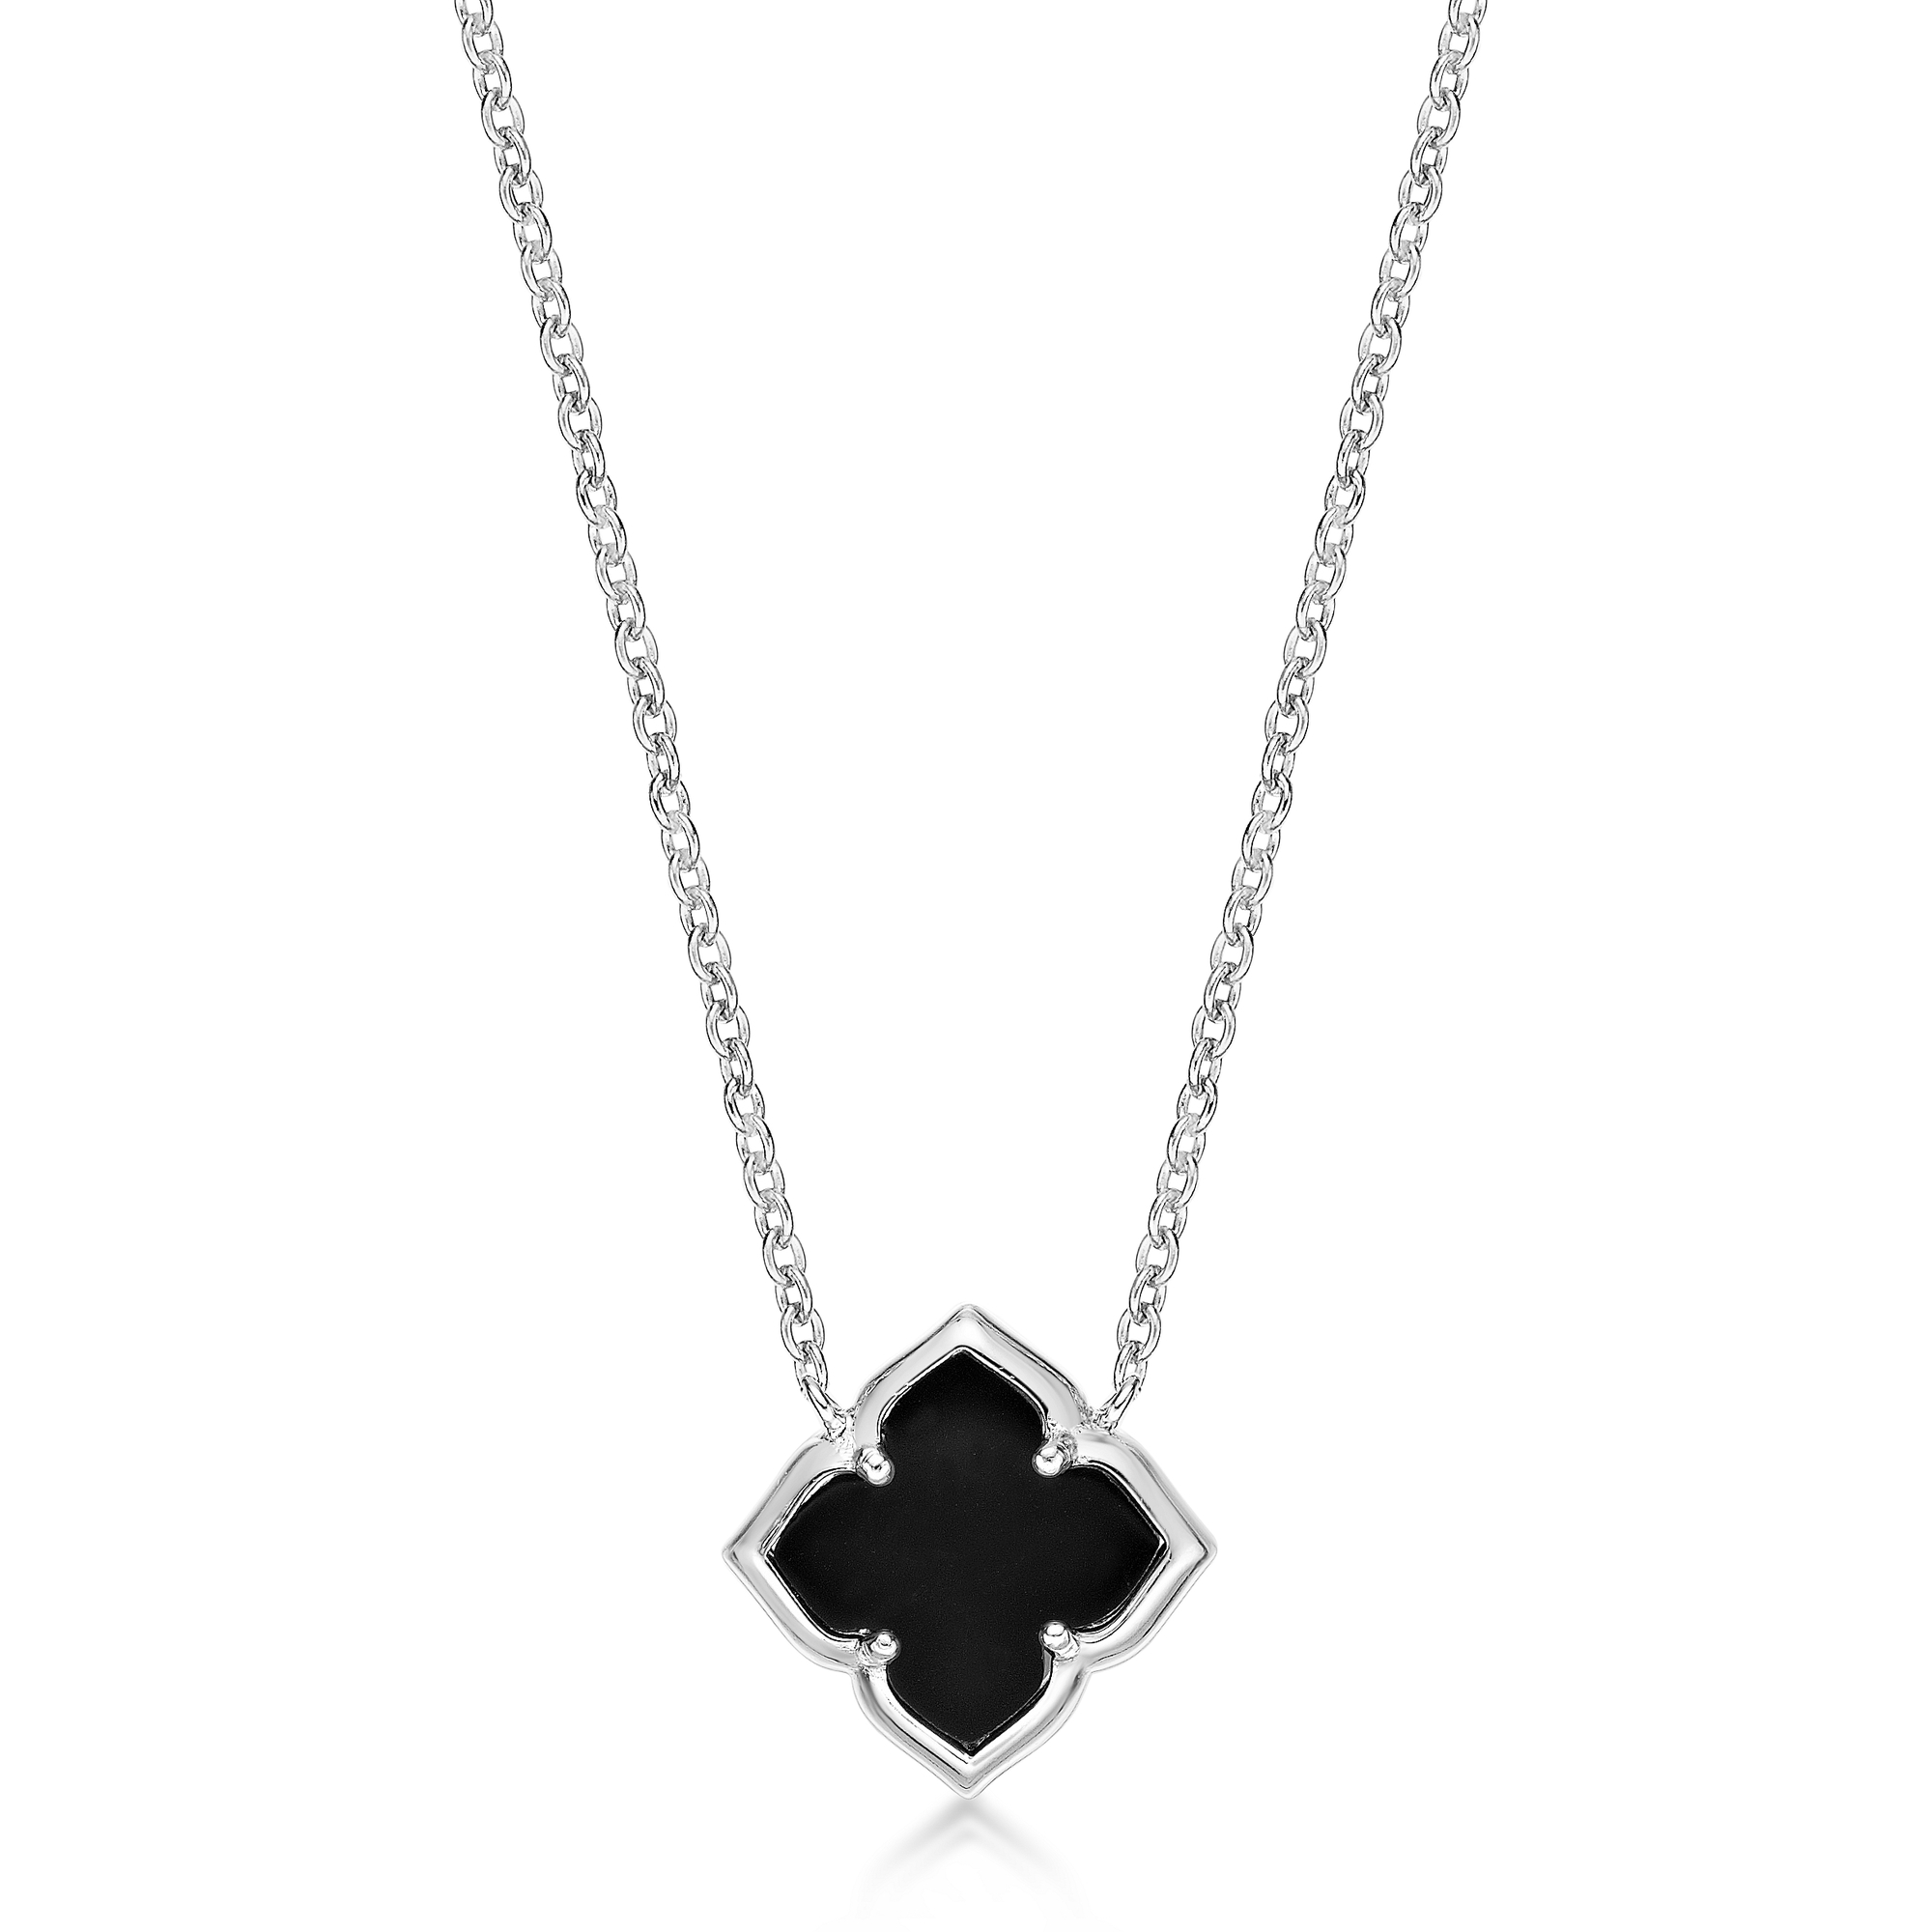 Lavari Jewelers Women’s Black Onyx Clover Pendant Necklace with Lobster Clasp, 925 Sterling Silver, 16-18 Inches